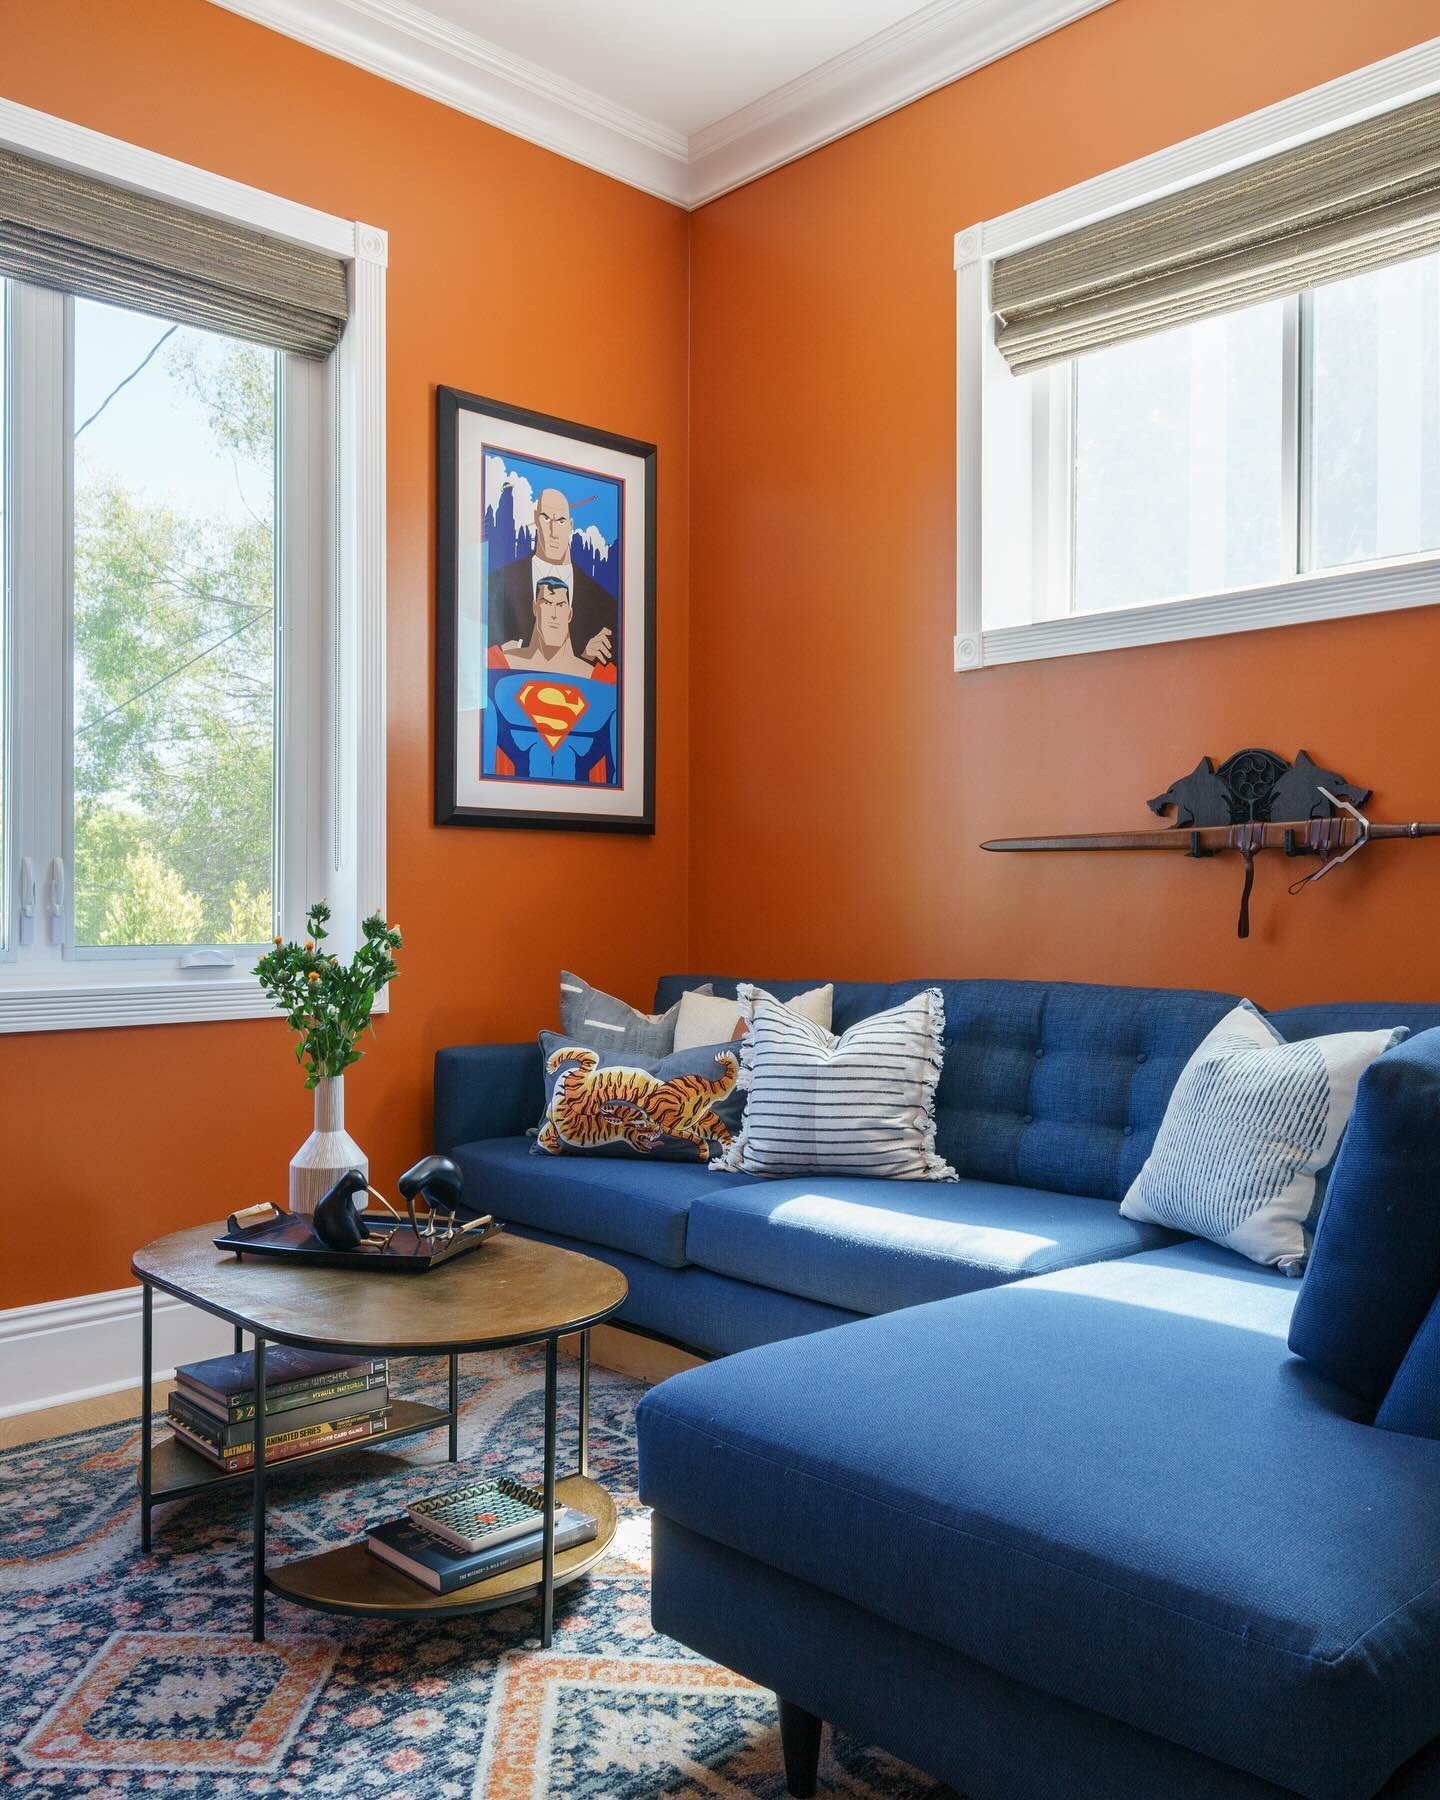 Superman and Samurai Swords for this vibrant man cave with @benjaminmoore&rsquo;s Gold Rush paint color 🖌️🧡

design: @nicolefaydesign 
.
.
.
.
.
.
#interiordesign #interiorinspo #sharemystyle #walltowallstyle #homedesign #adstyle #sodomino #howwedw